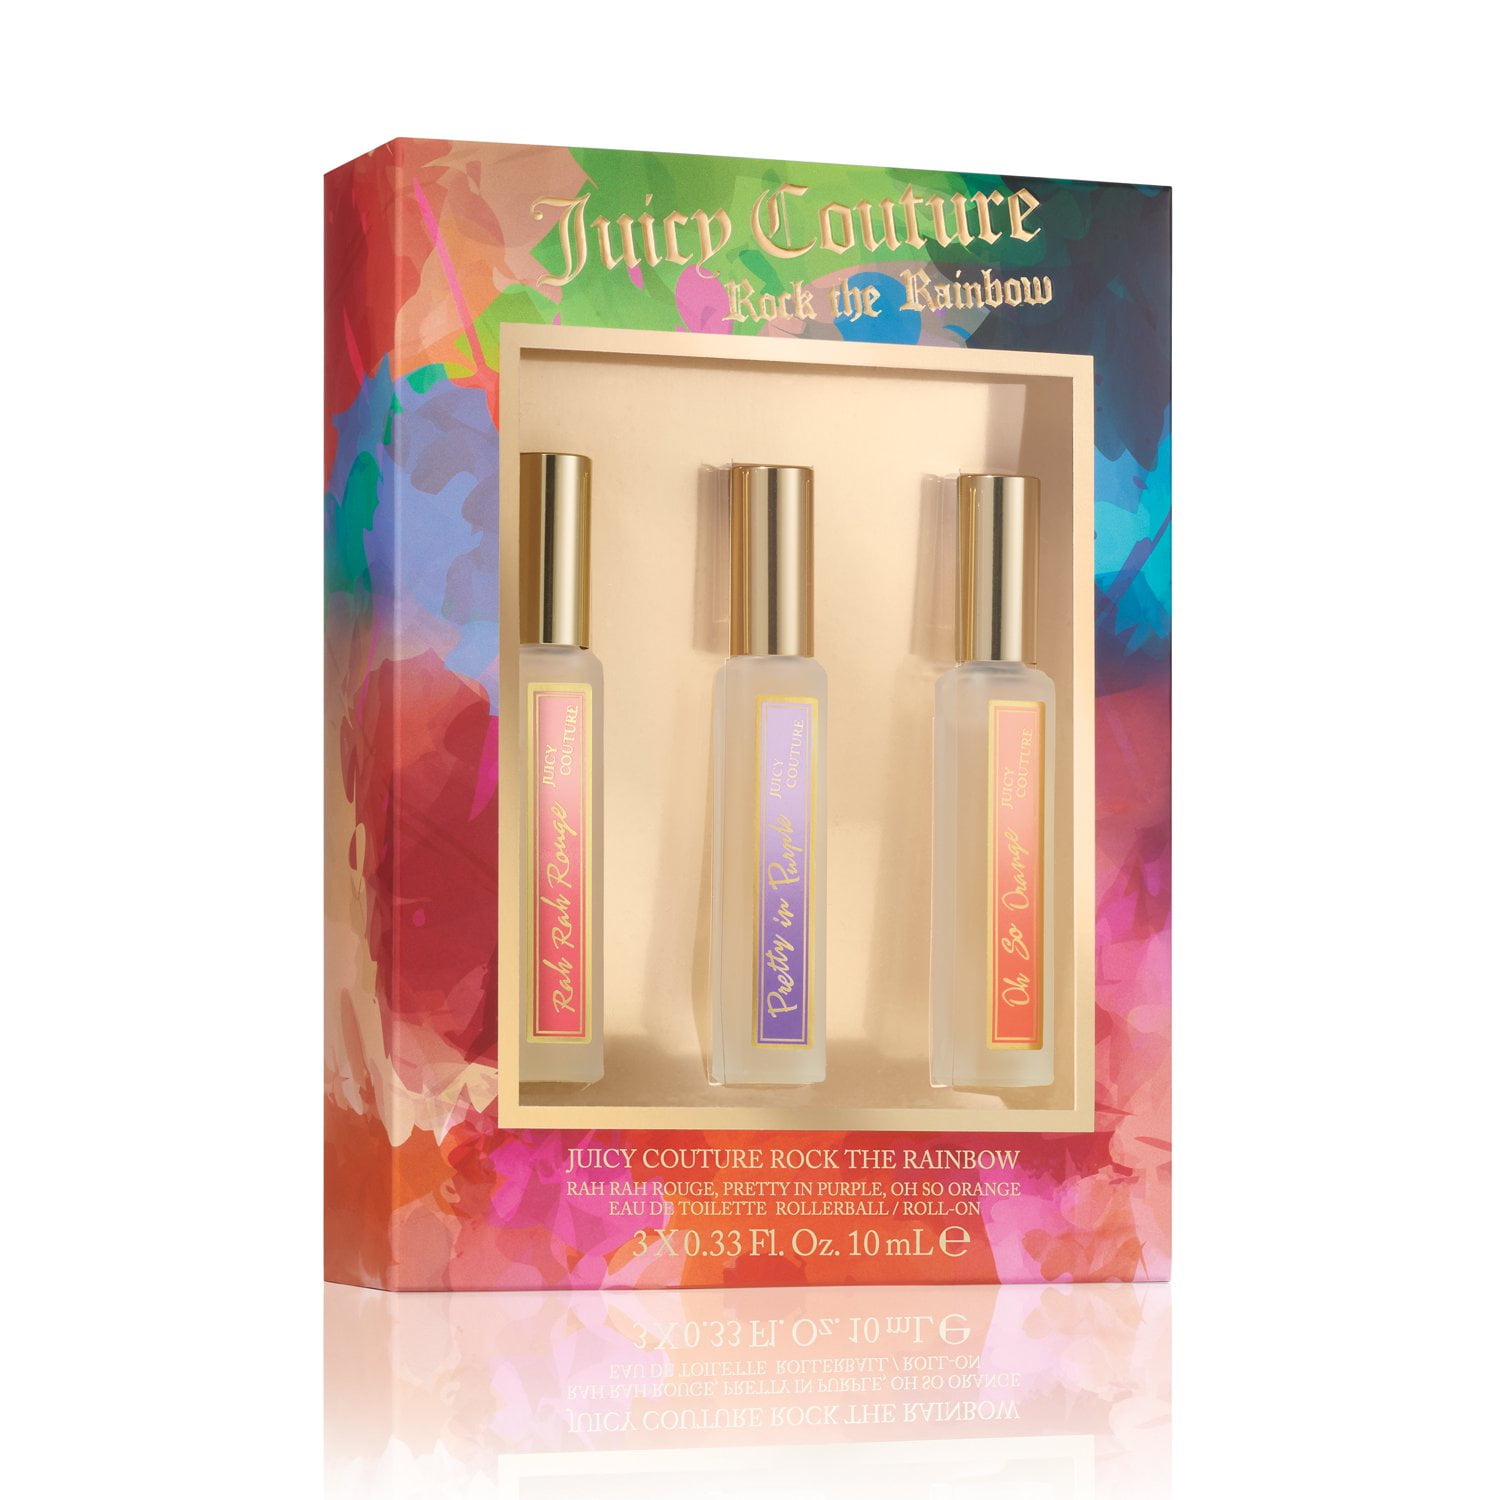 Juicy Couture Rock The Rainbow 3 Piece Rollerball Coffret, Perfume for Women, 0.33 fl oz